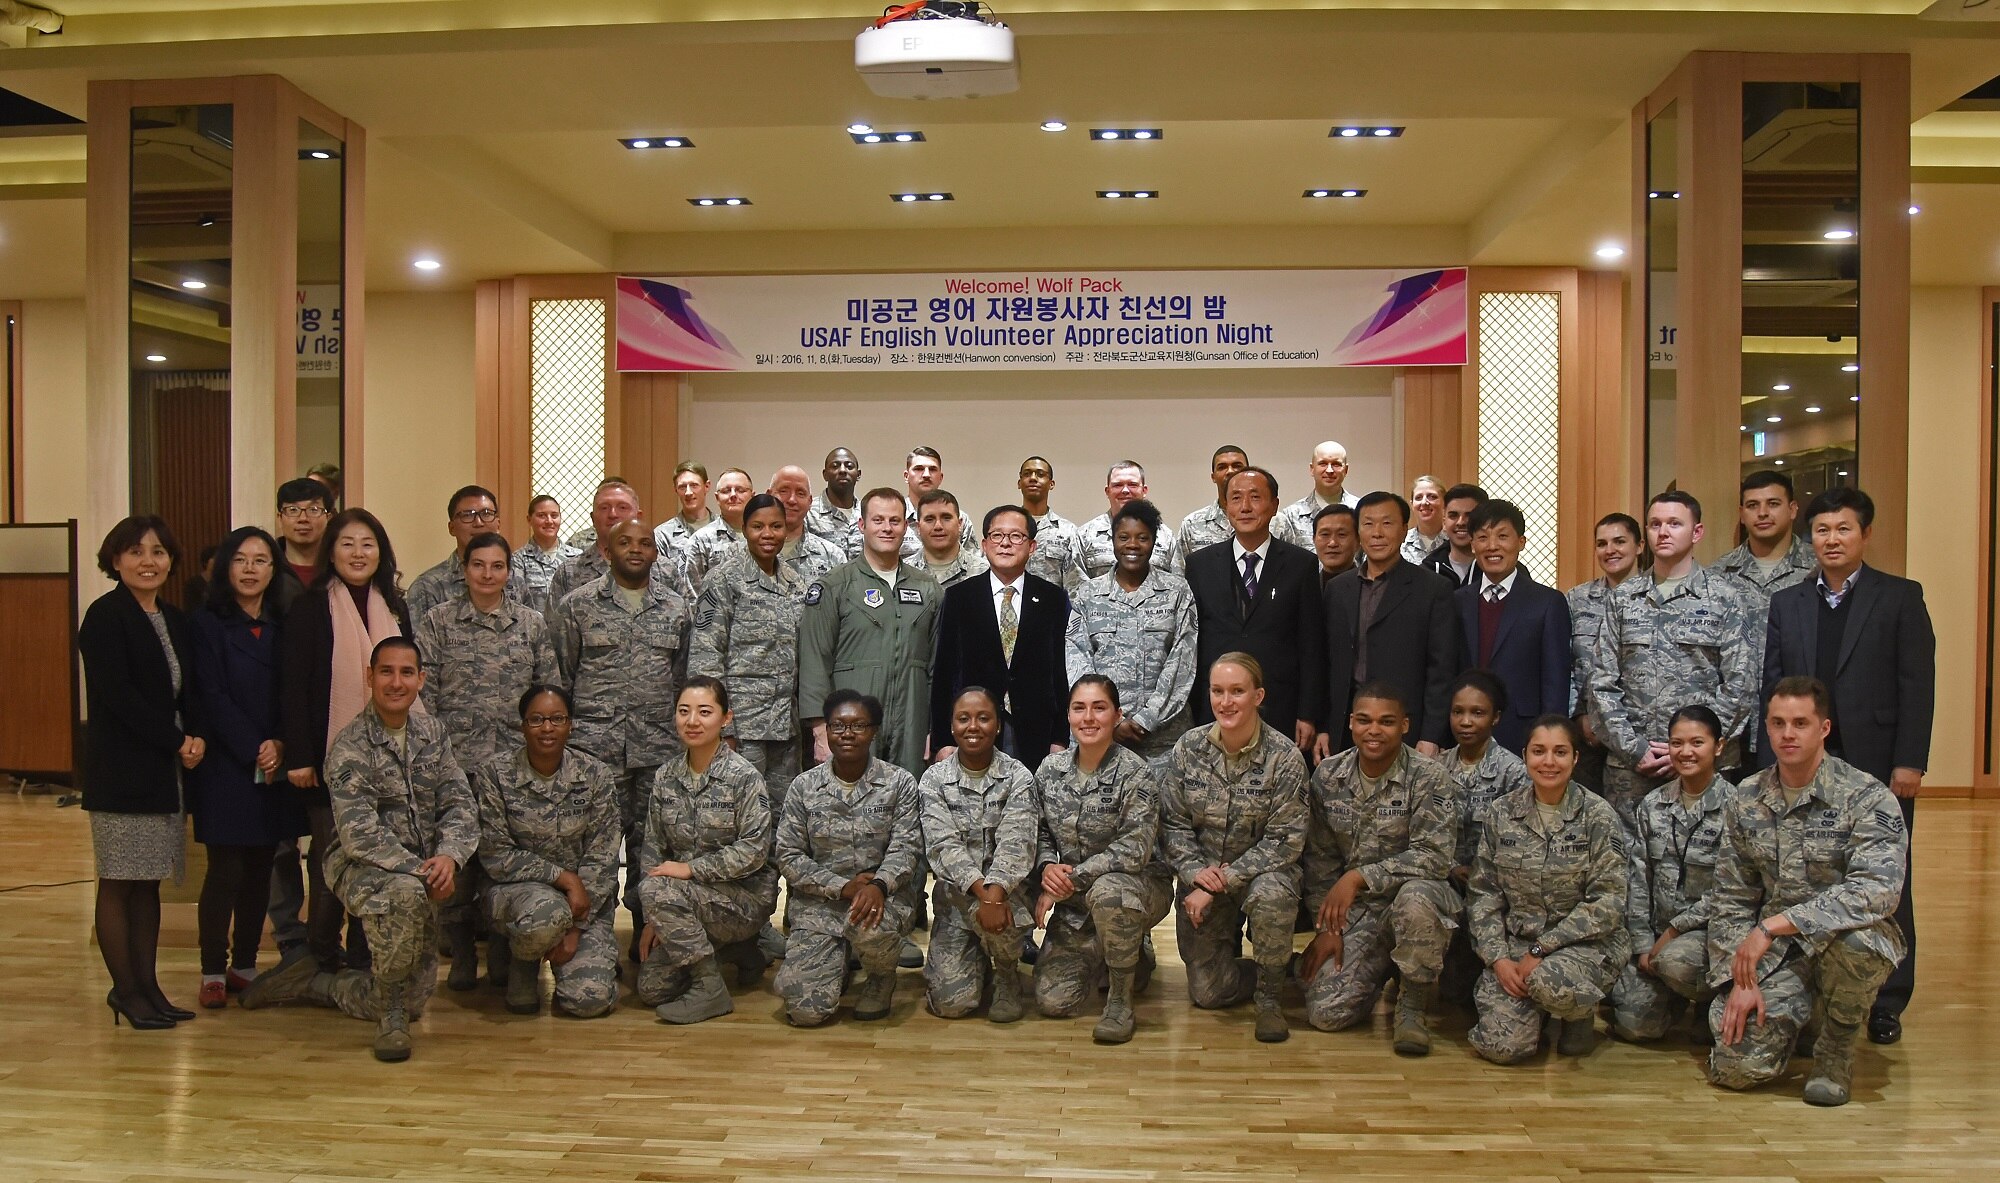 Airmen from the 8th Fighter Wing are recognized during a volunteer appreciation night at the Hanwon Convention room in the city of Gunsan, Republic of Korea, Nov. 8, 2016. Each of the volunteers taught English to students from 36 different schools in Gunsan. The students involved in the program also attended the appreciation night and were able to sit with their respective teachers. (U.S. Air Force photo by Tech. Sgt. Jeff Andrejcik/Released)